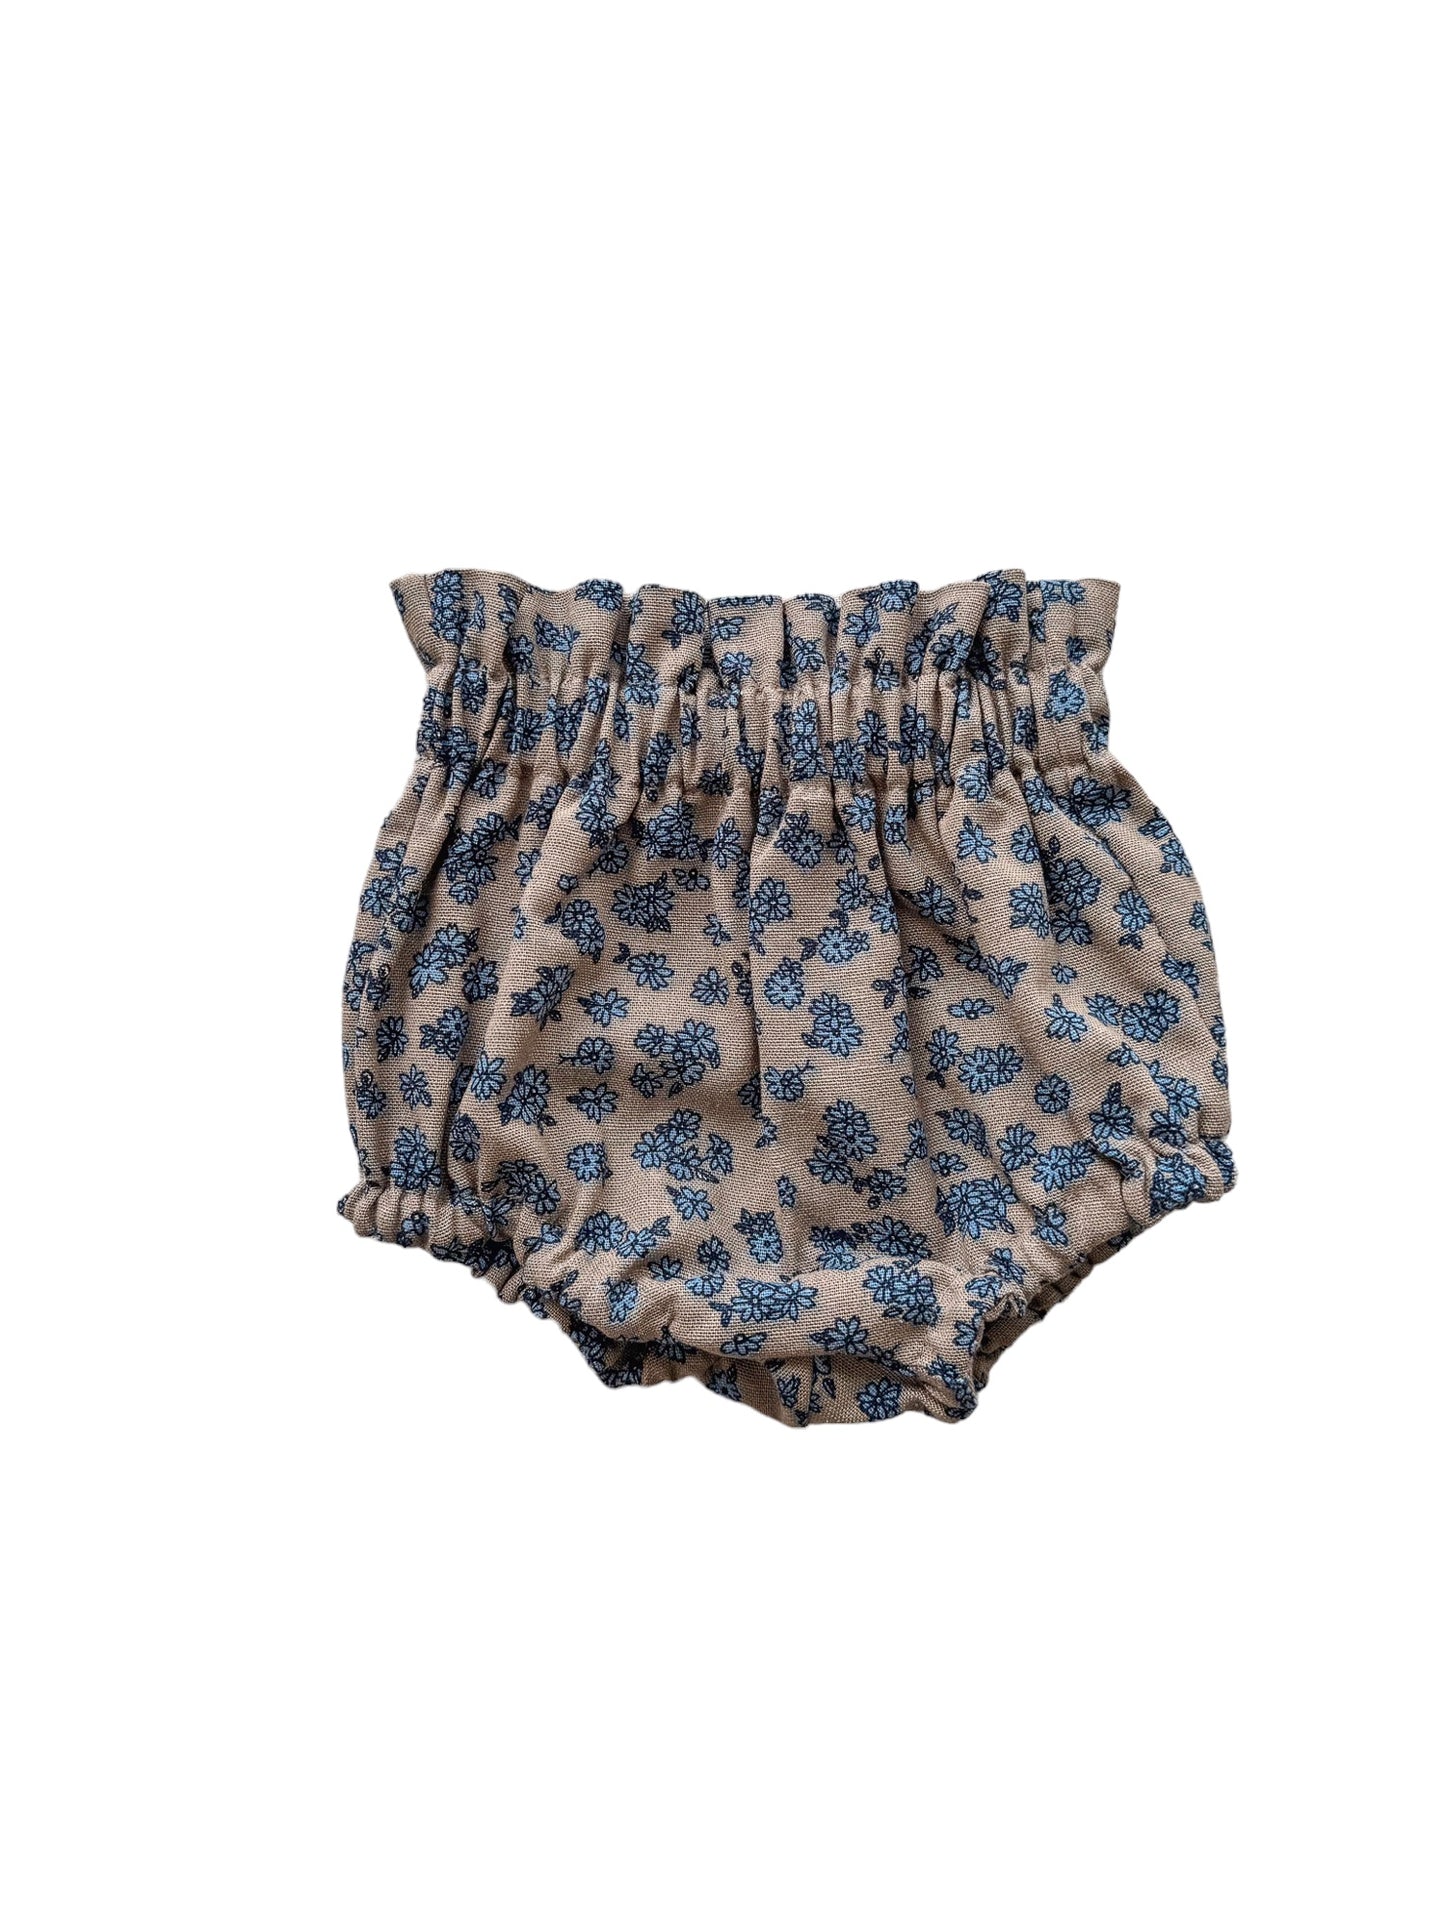 Baby bloomers / linen - tiny flowers - beige + blue